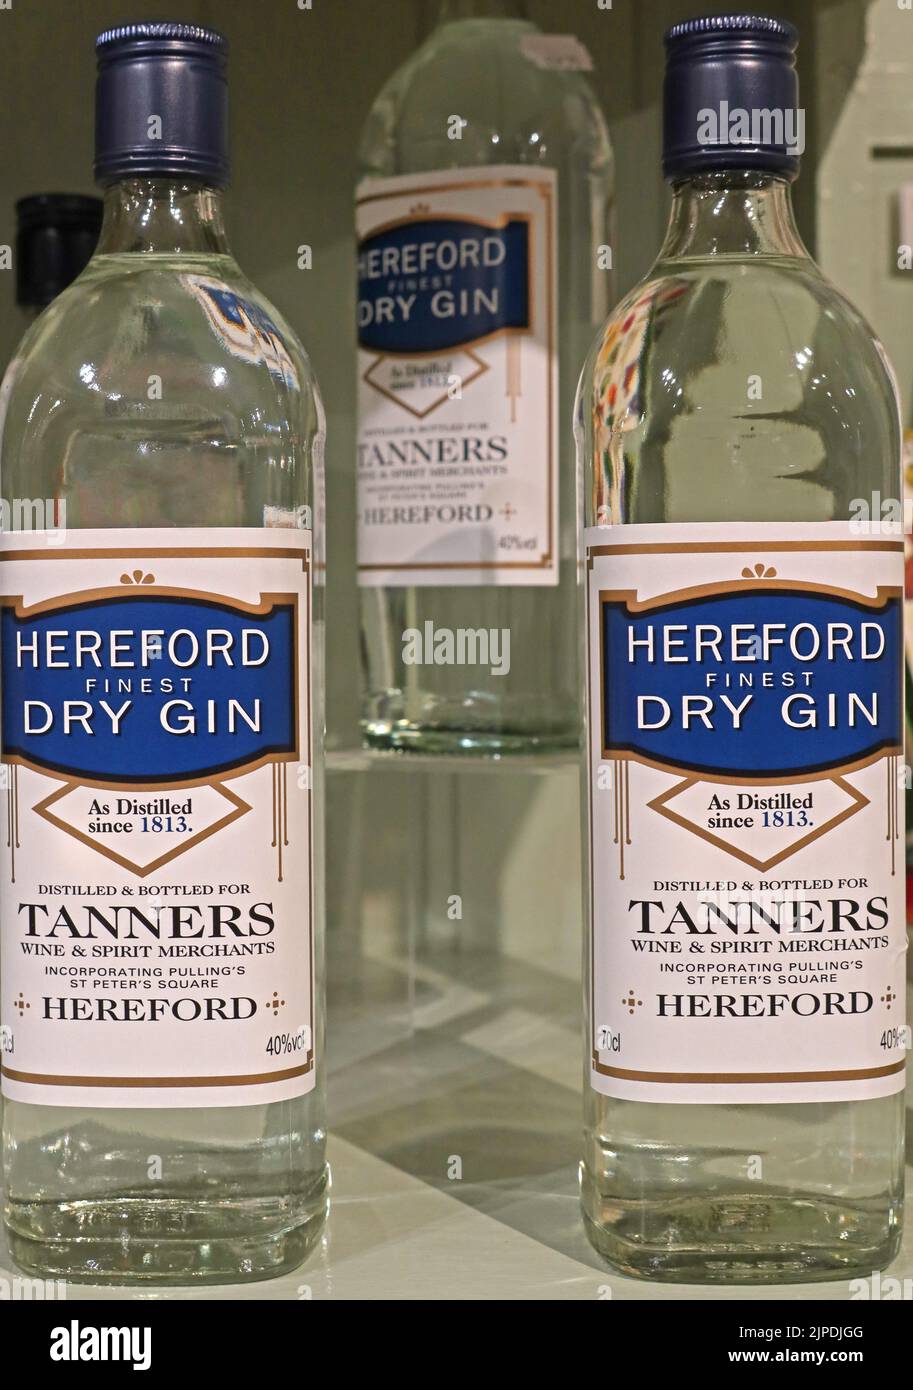 Tanners, Hereford finest Dry Gin bottles Stock Photo